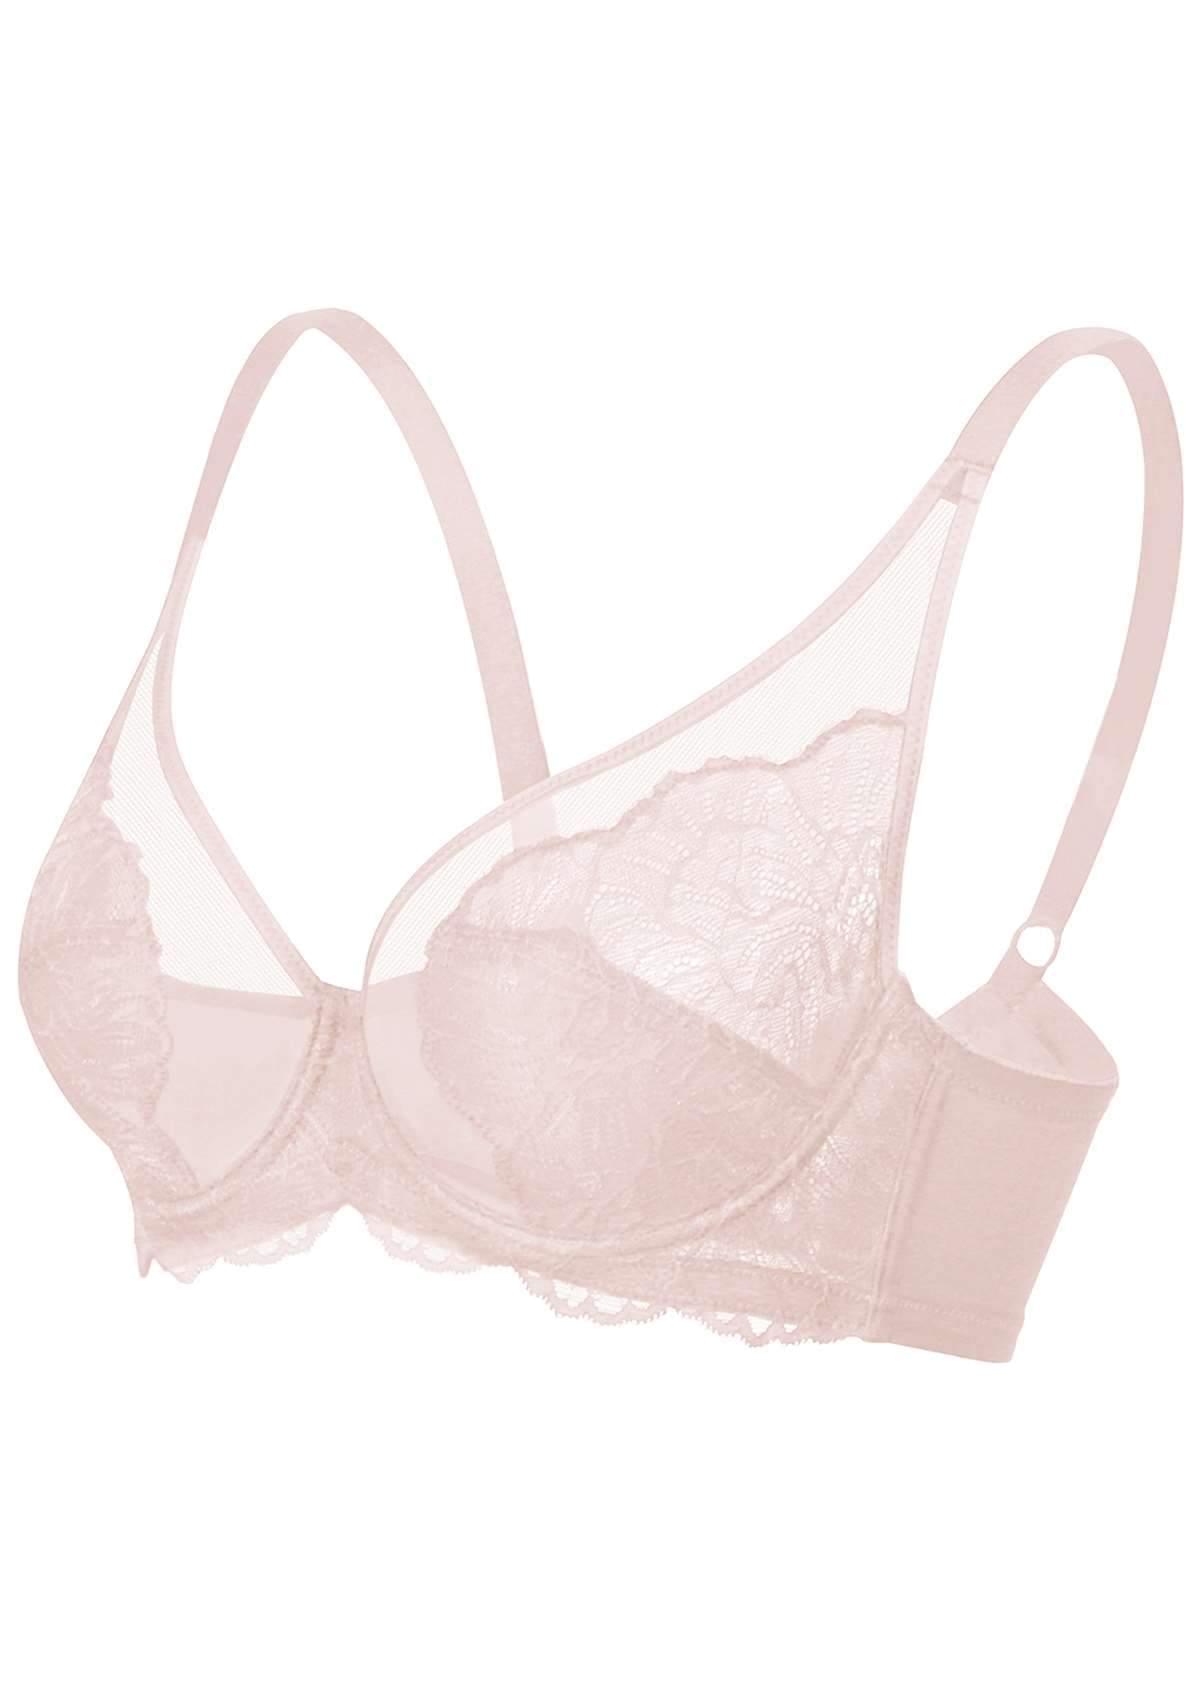 HSIA Blossom Lace Bra And Panties Set: Best Bra For Large Busts - Dark Pink / 42 / DD/E